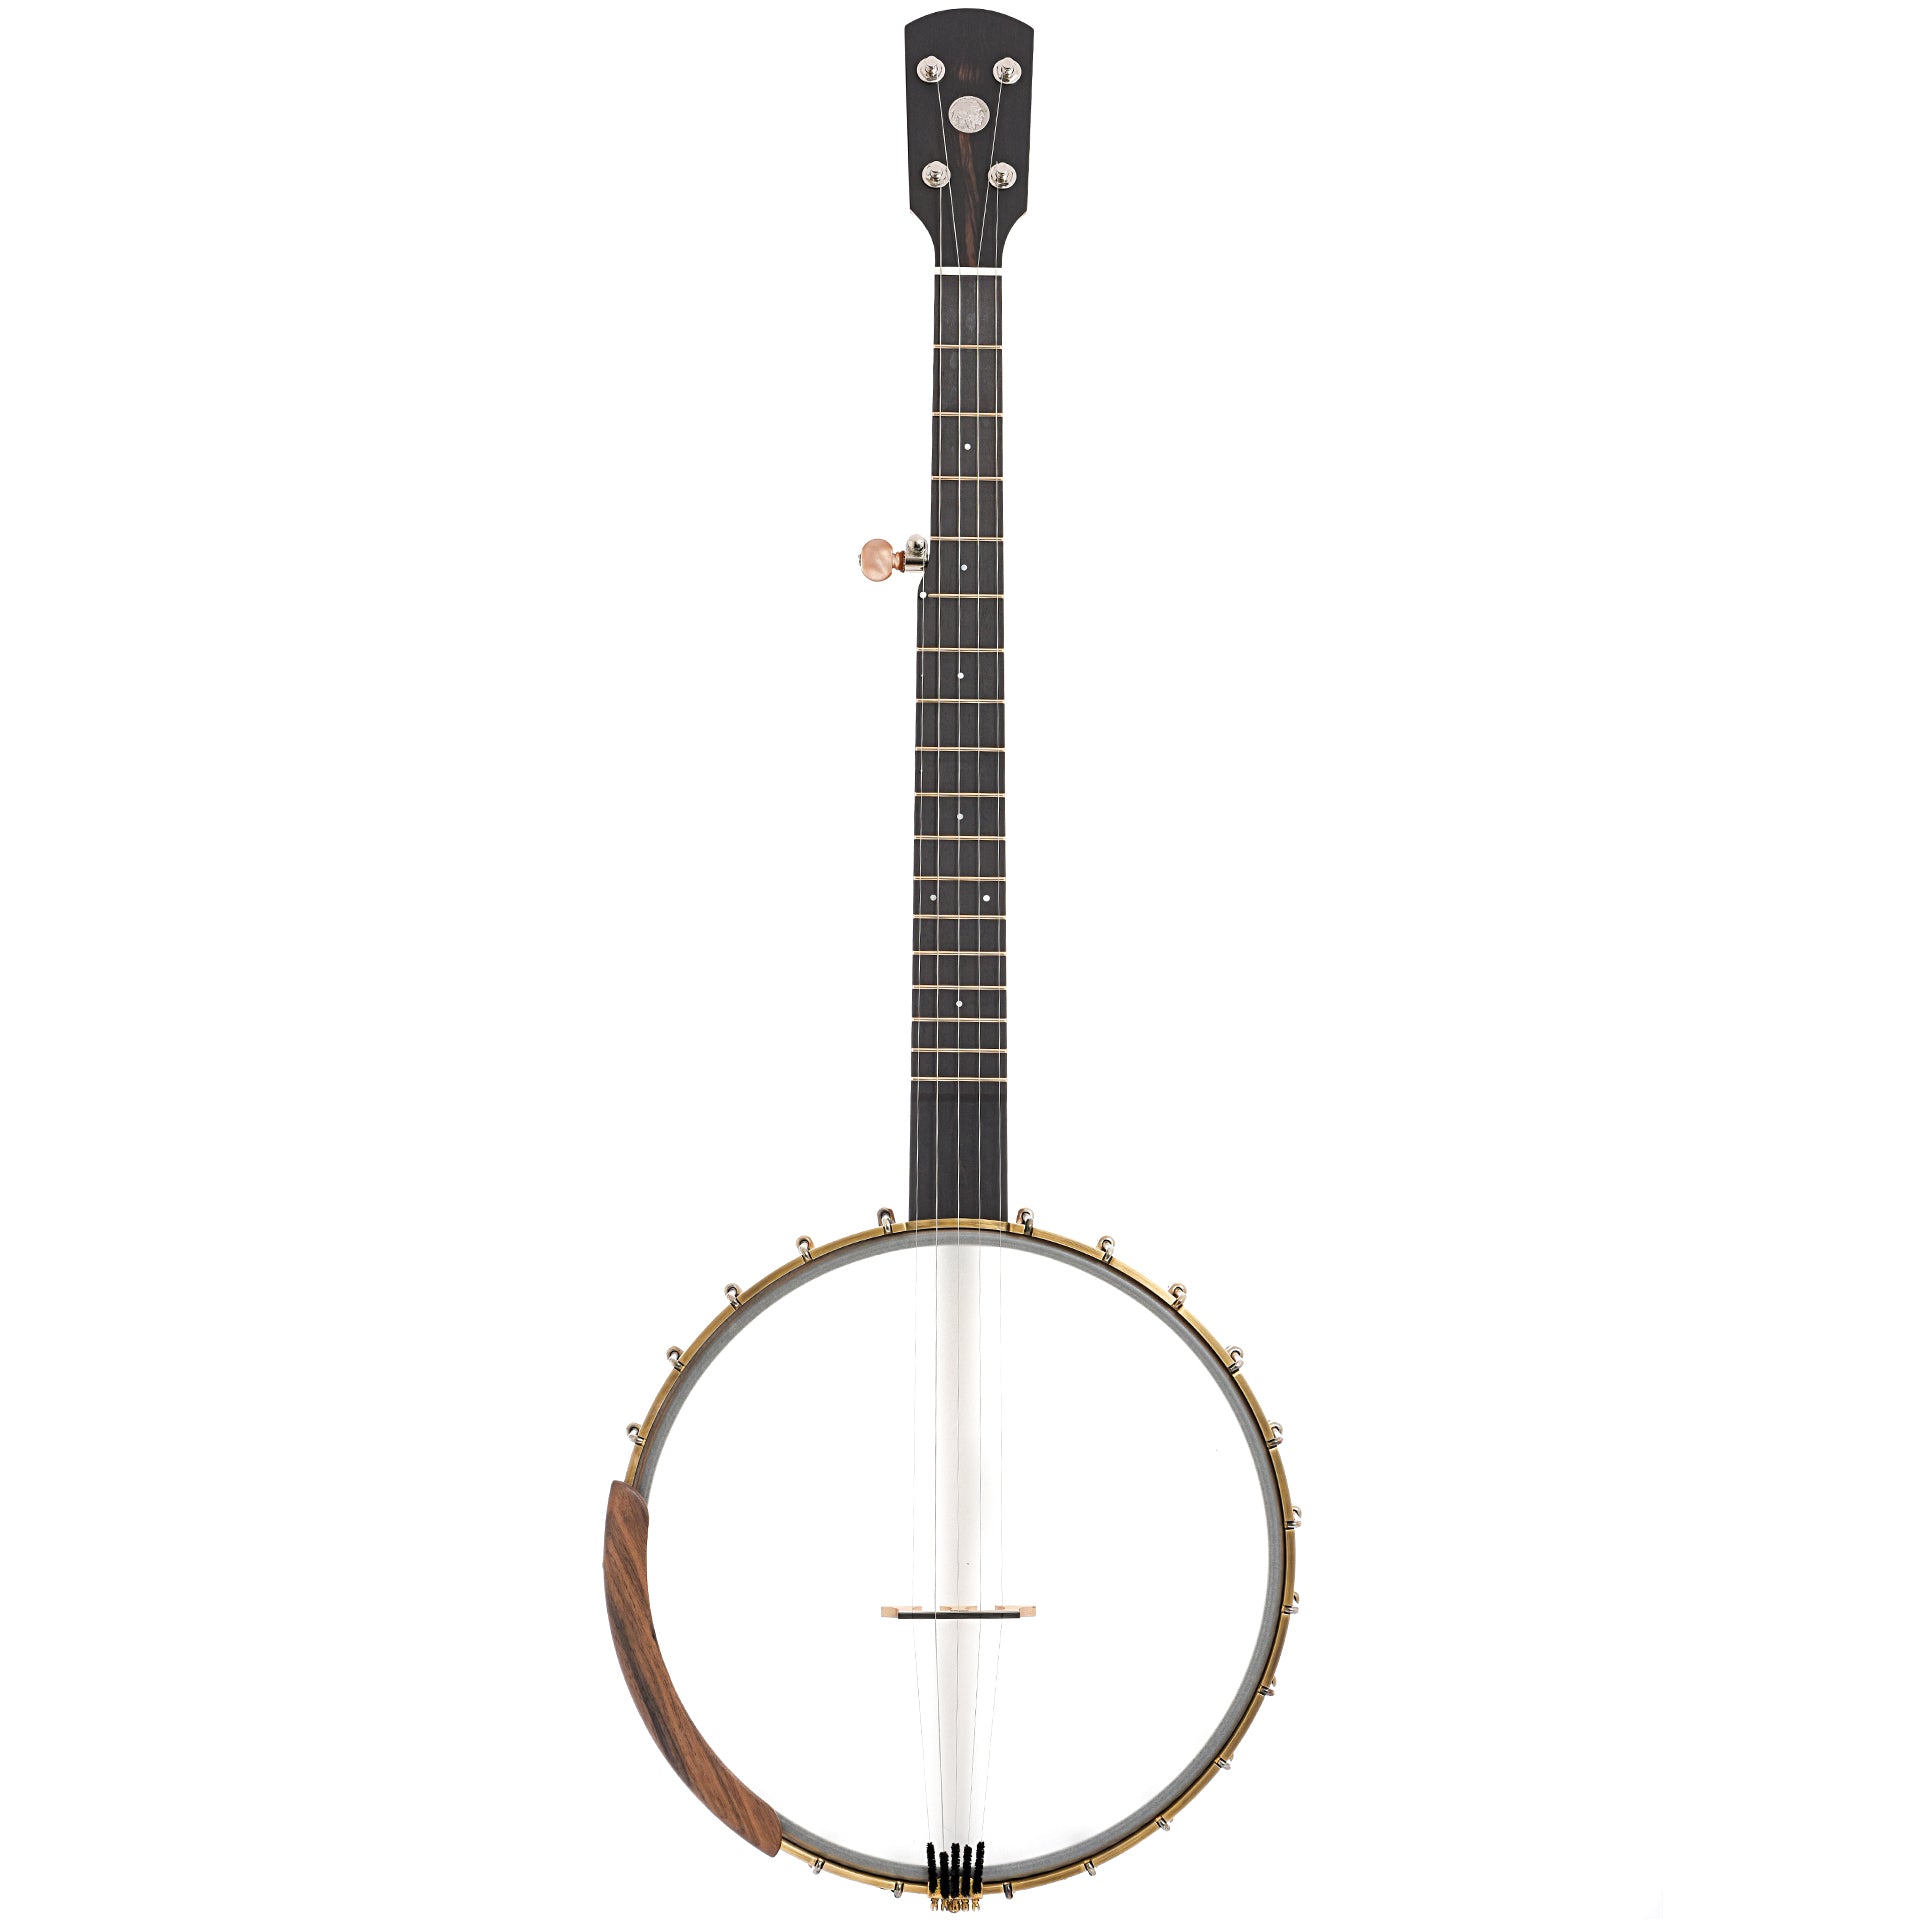 Full front of Ode Magician 13" Openback Banjo